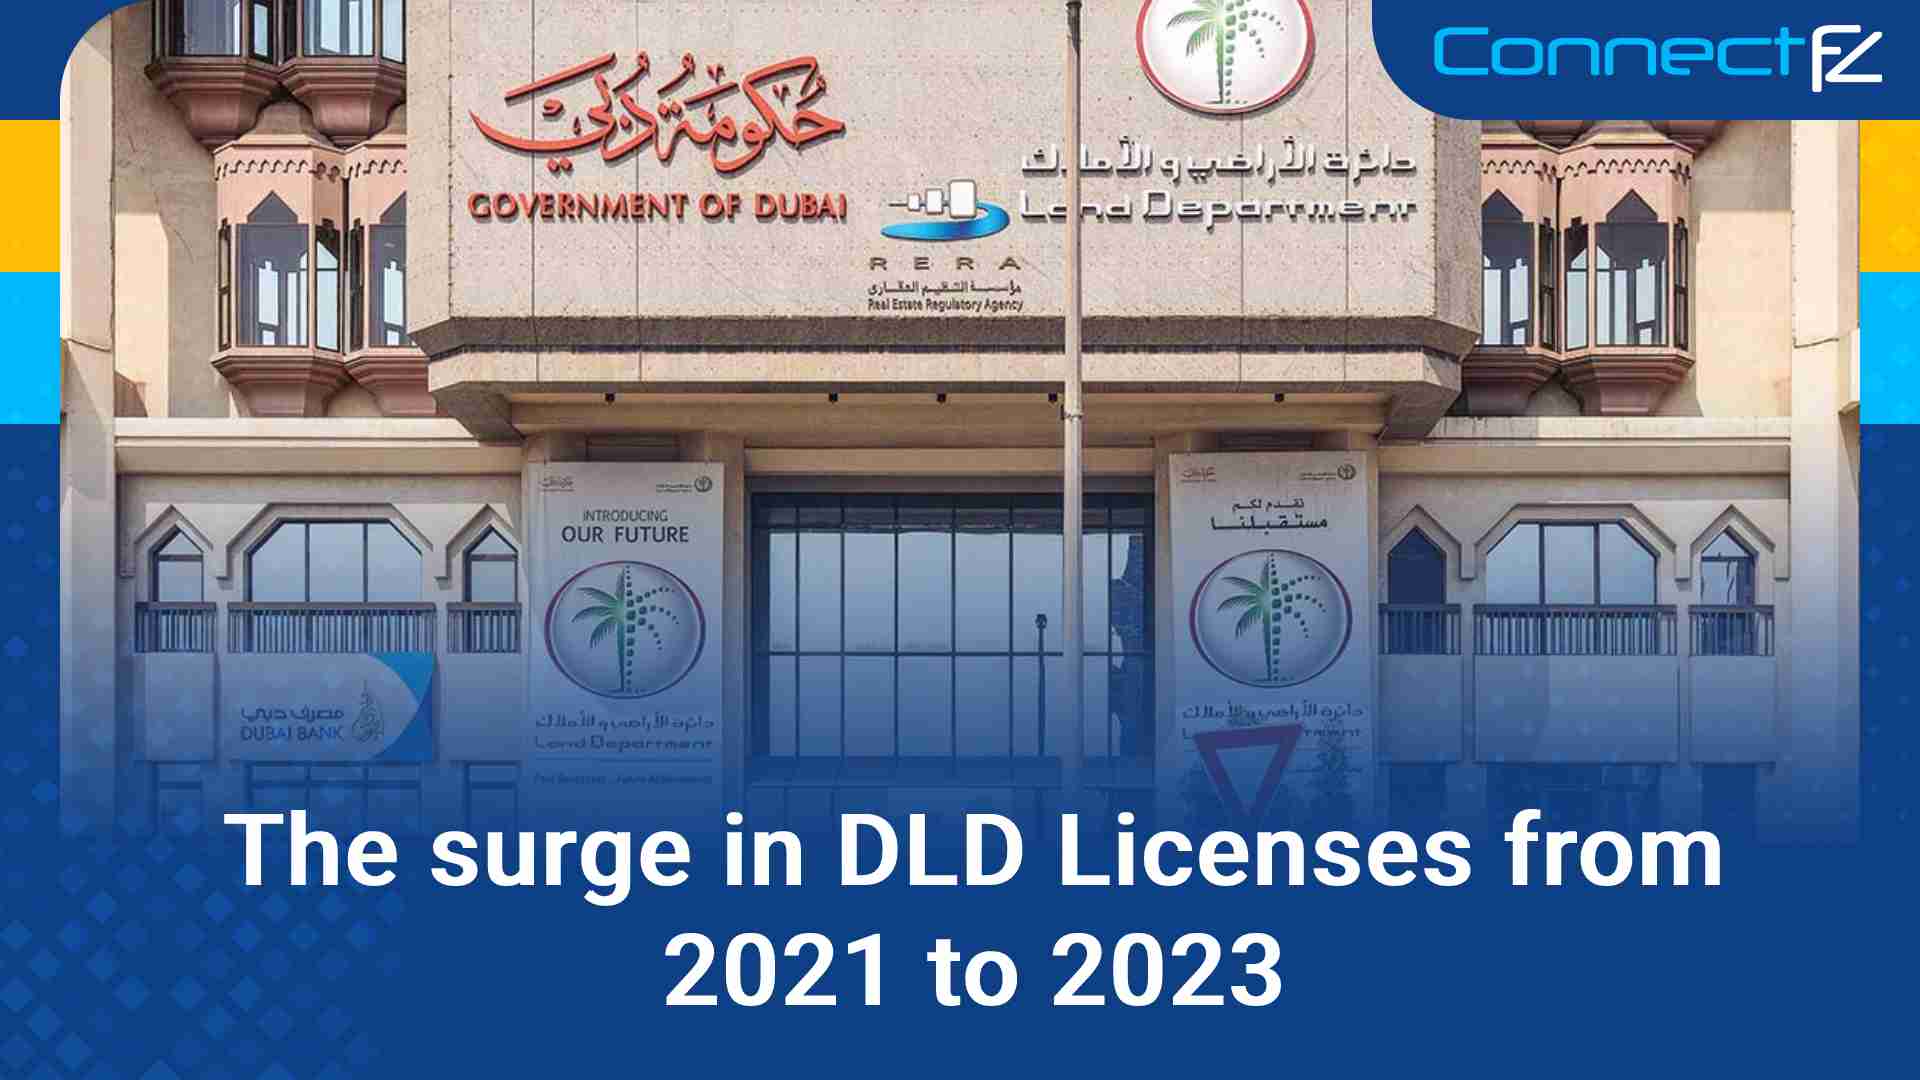 The surge in DLD Licenses from 2021 to 2023